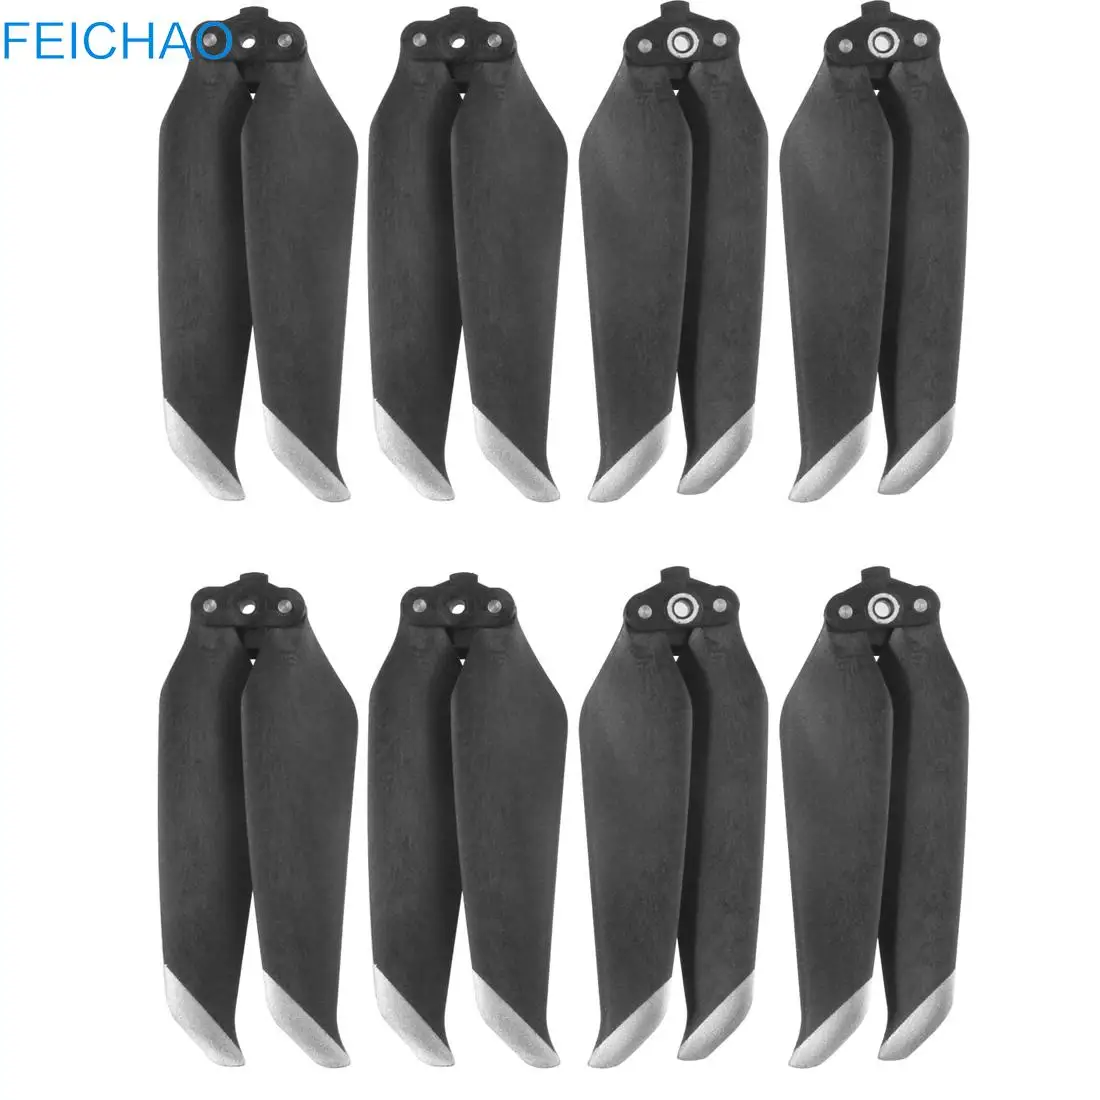 

4 Pairs for DJI Mavic Air 2 Drone 7238F Propeller CW CCW Foldable Quick Release Props Noise Reduction Prop RC Quadcopter Replace